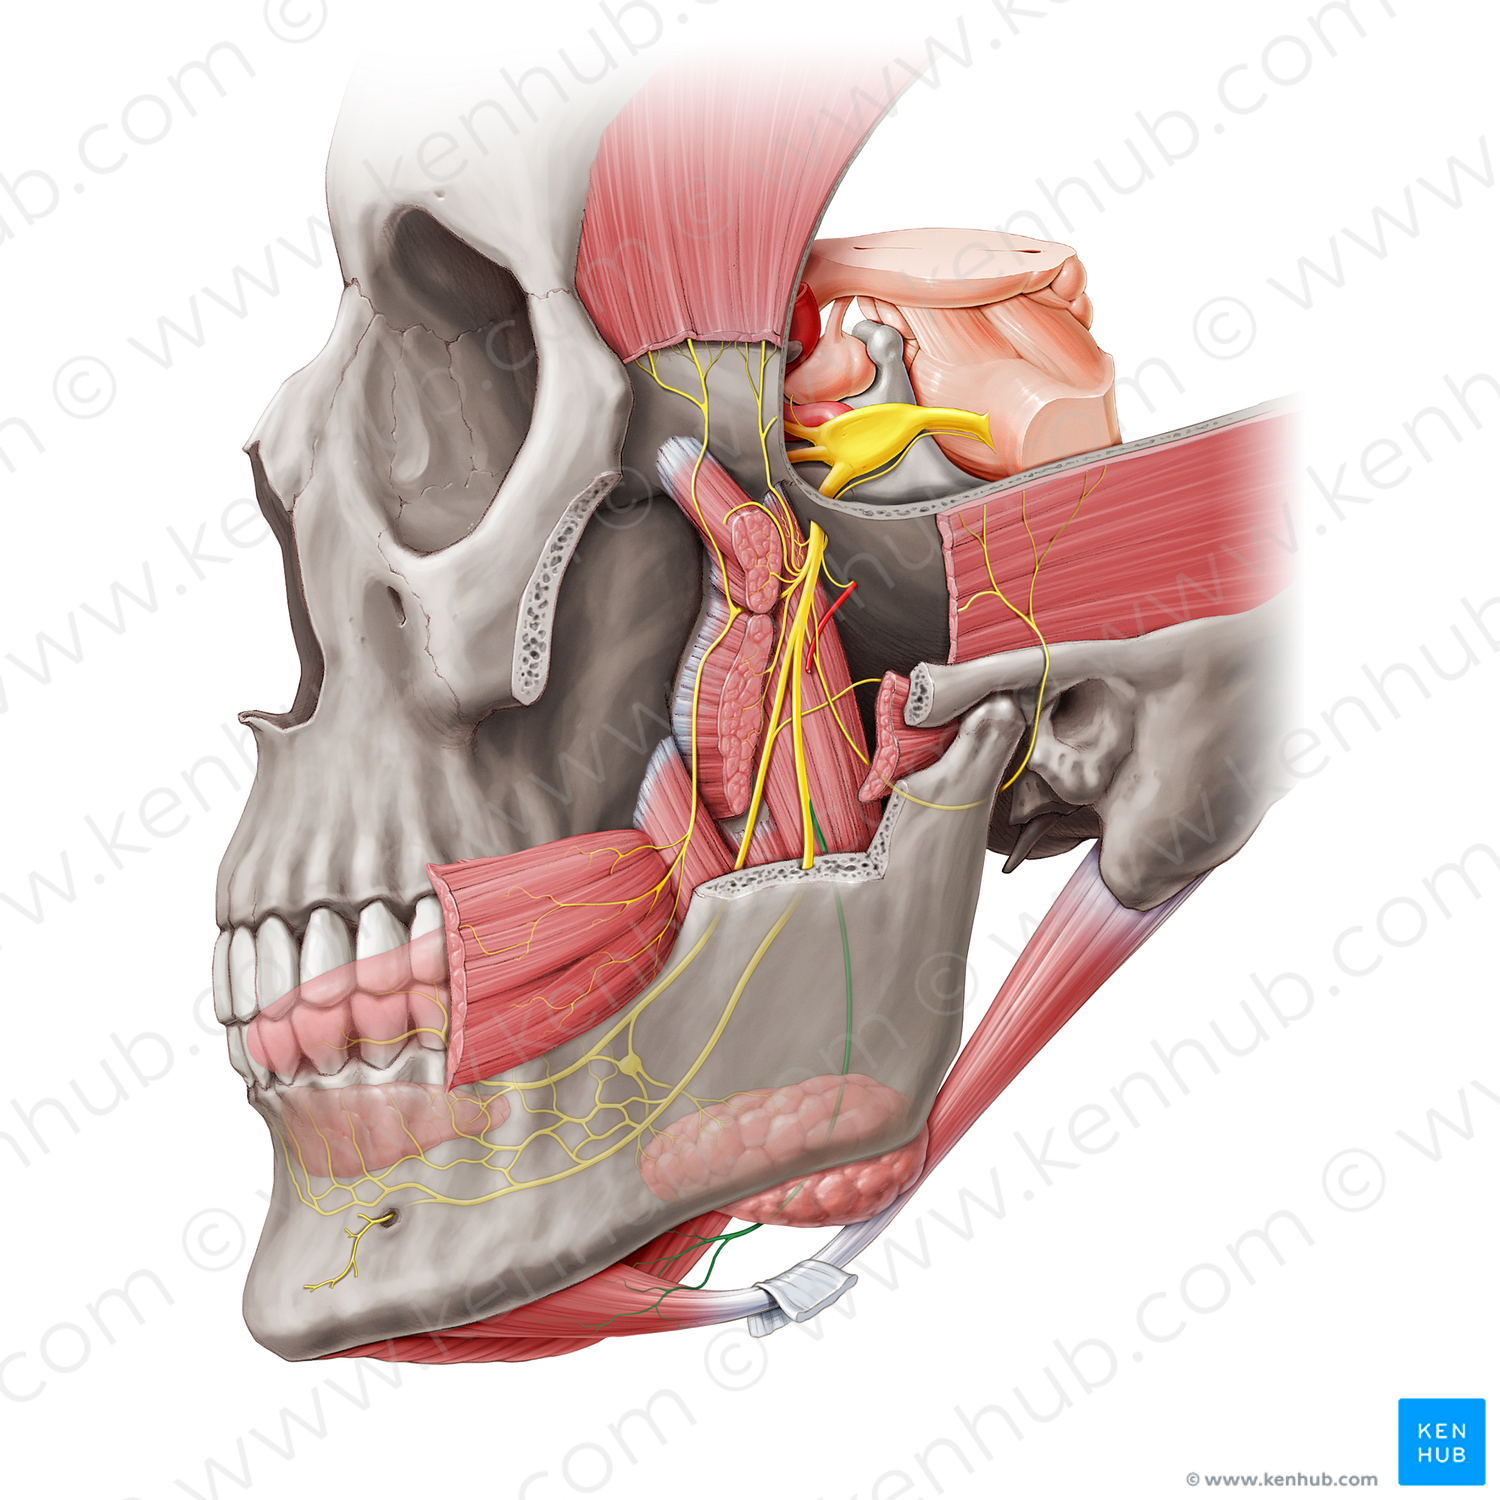 Nerve to mylohyoid muscle (#6583)